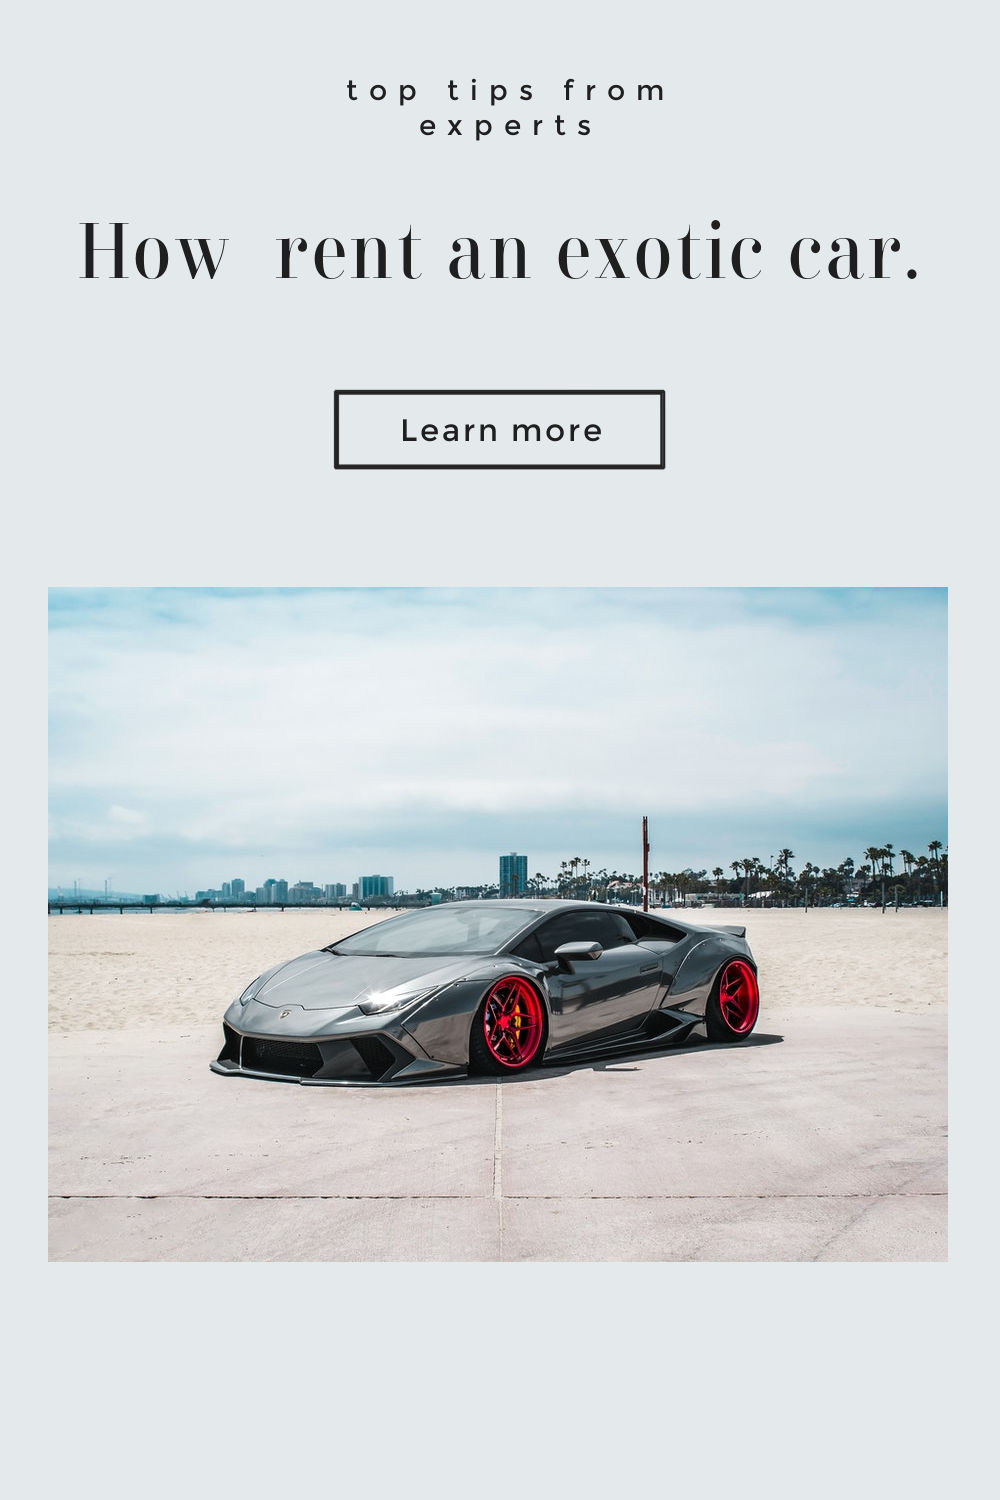 Tips for how to rent an exotic car.